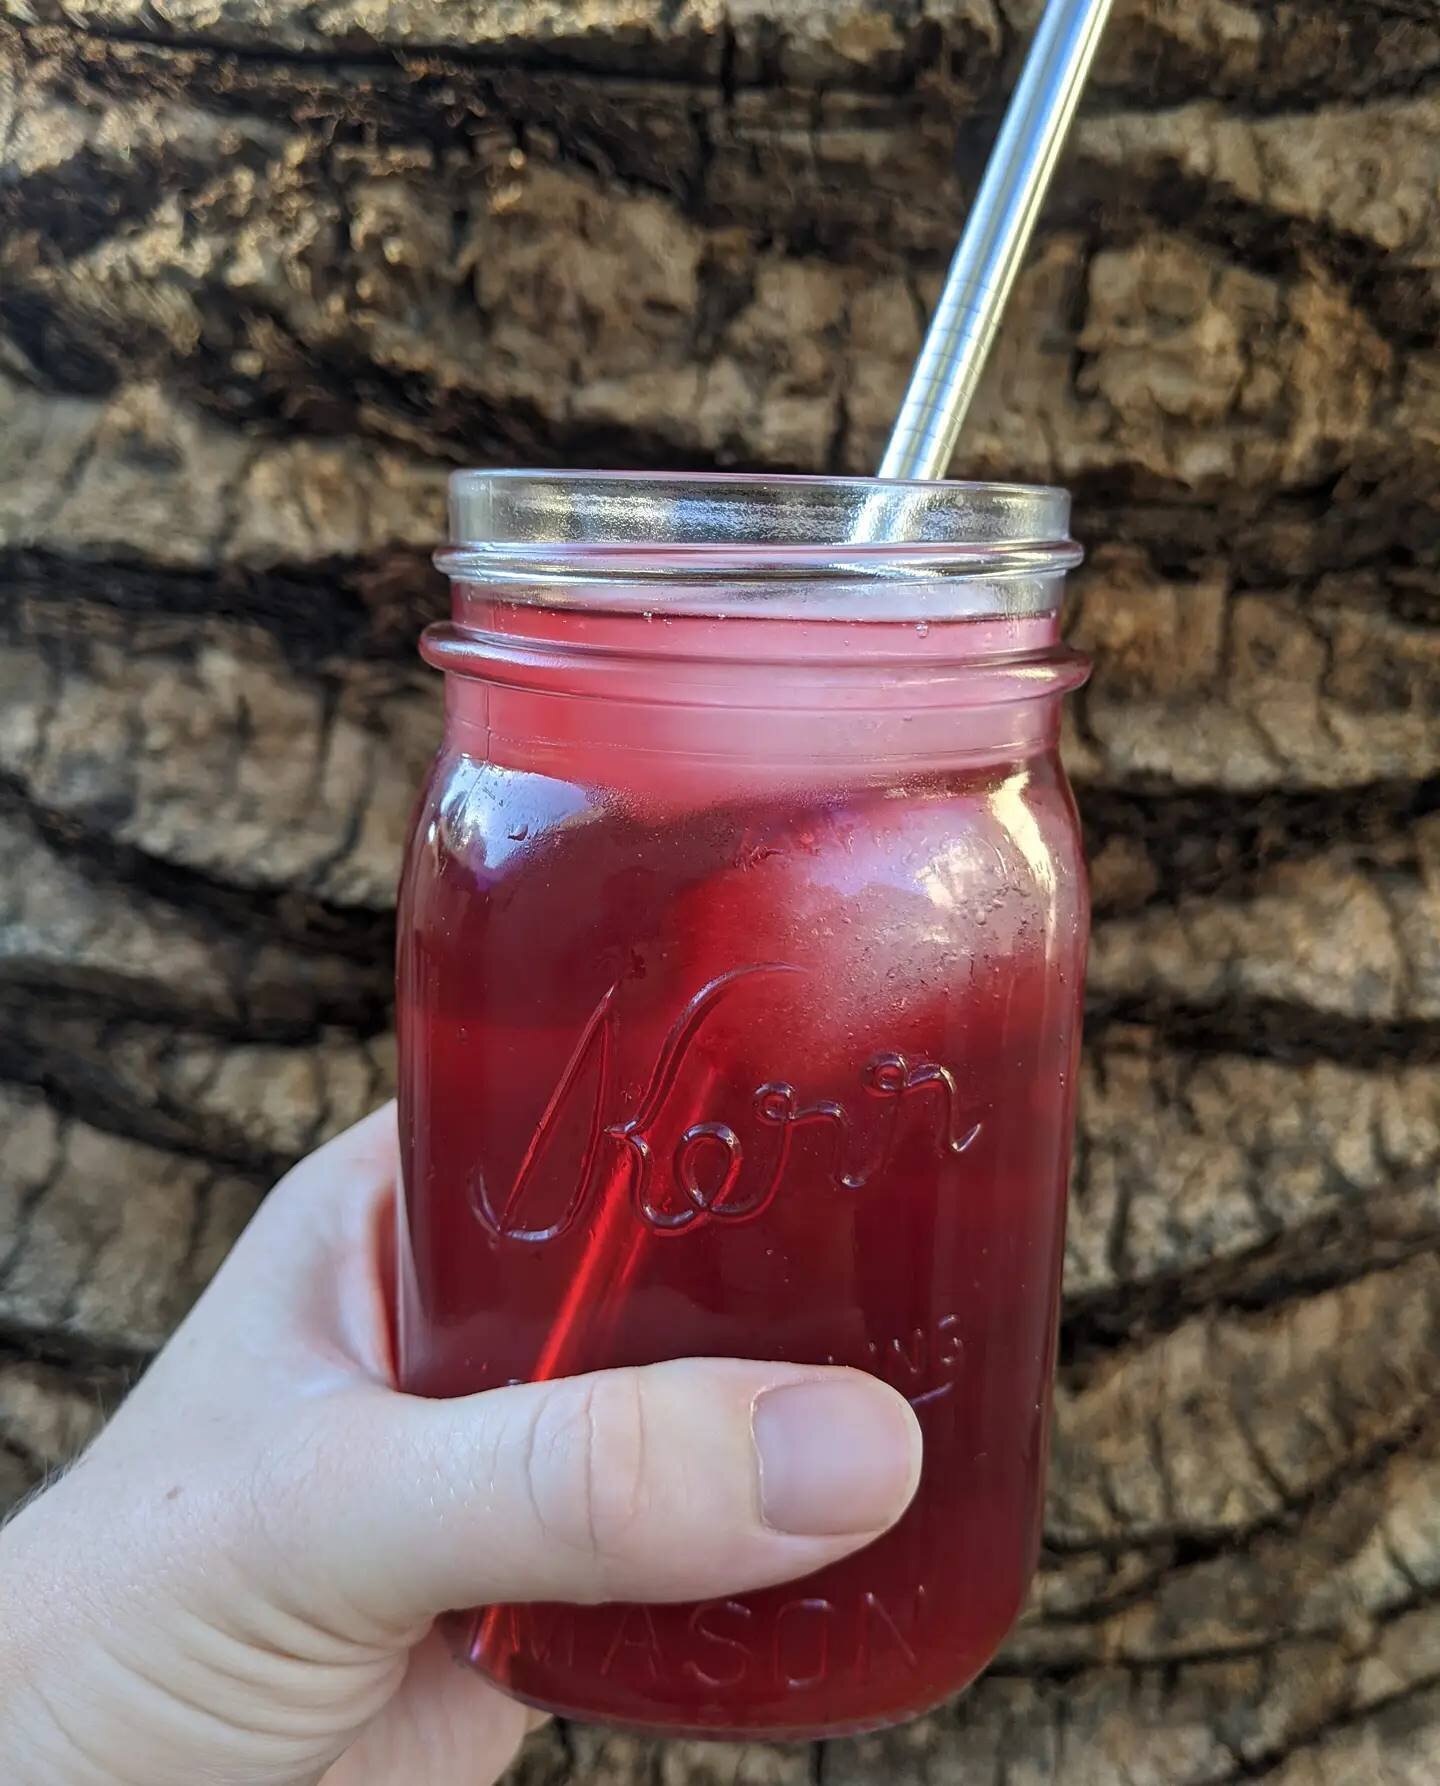 Oh so refreshing! Iced Hibiscus Blessing is where it's at this summer! Order some today on our website!